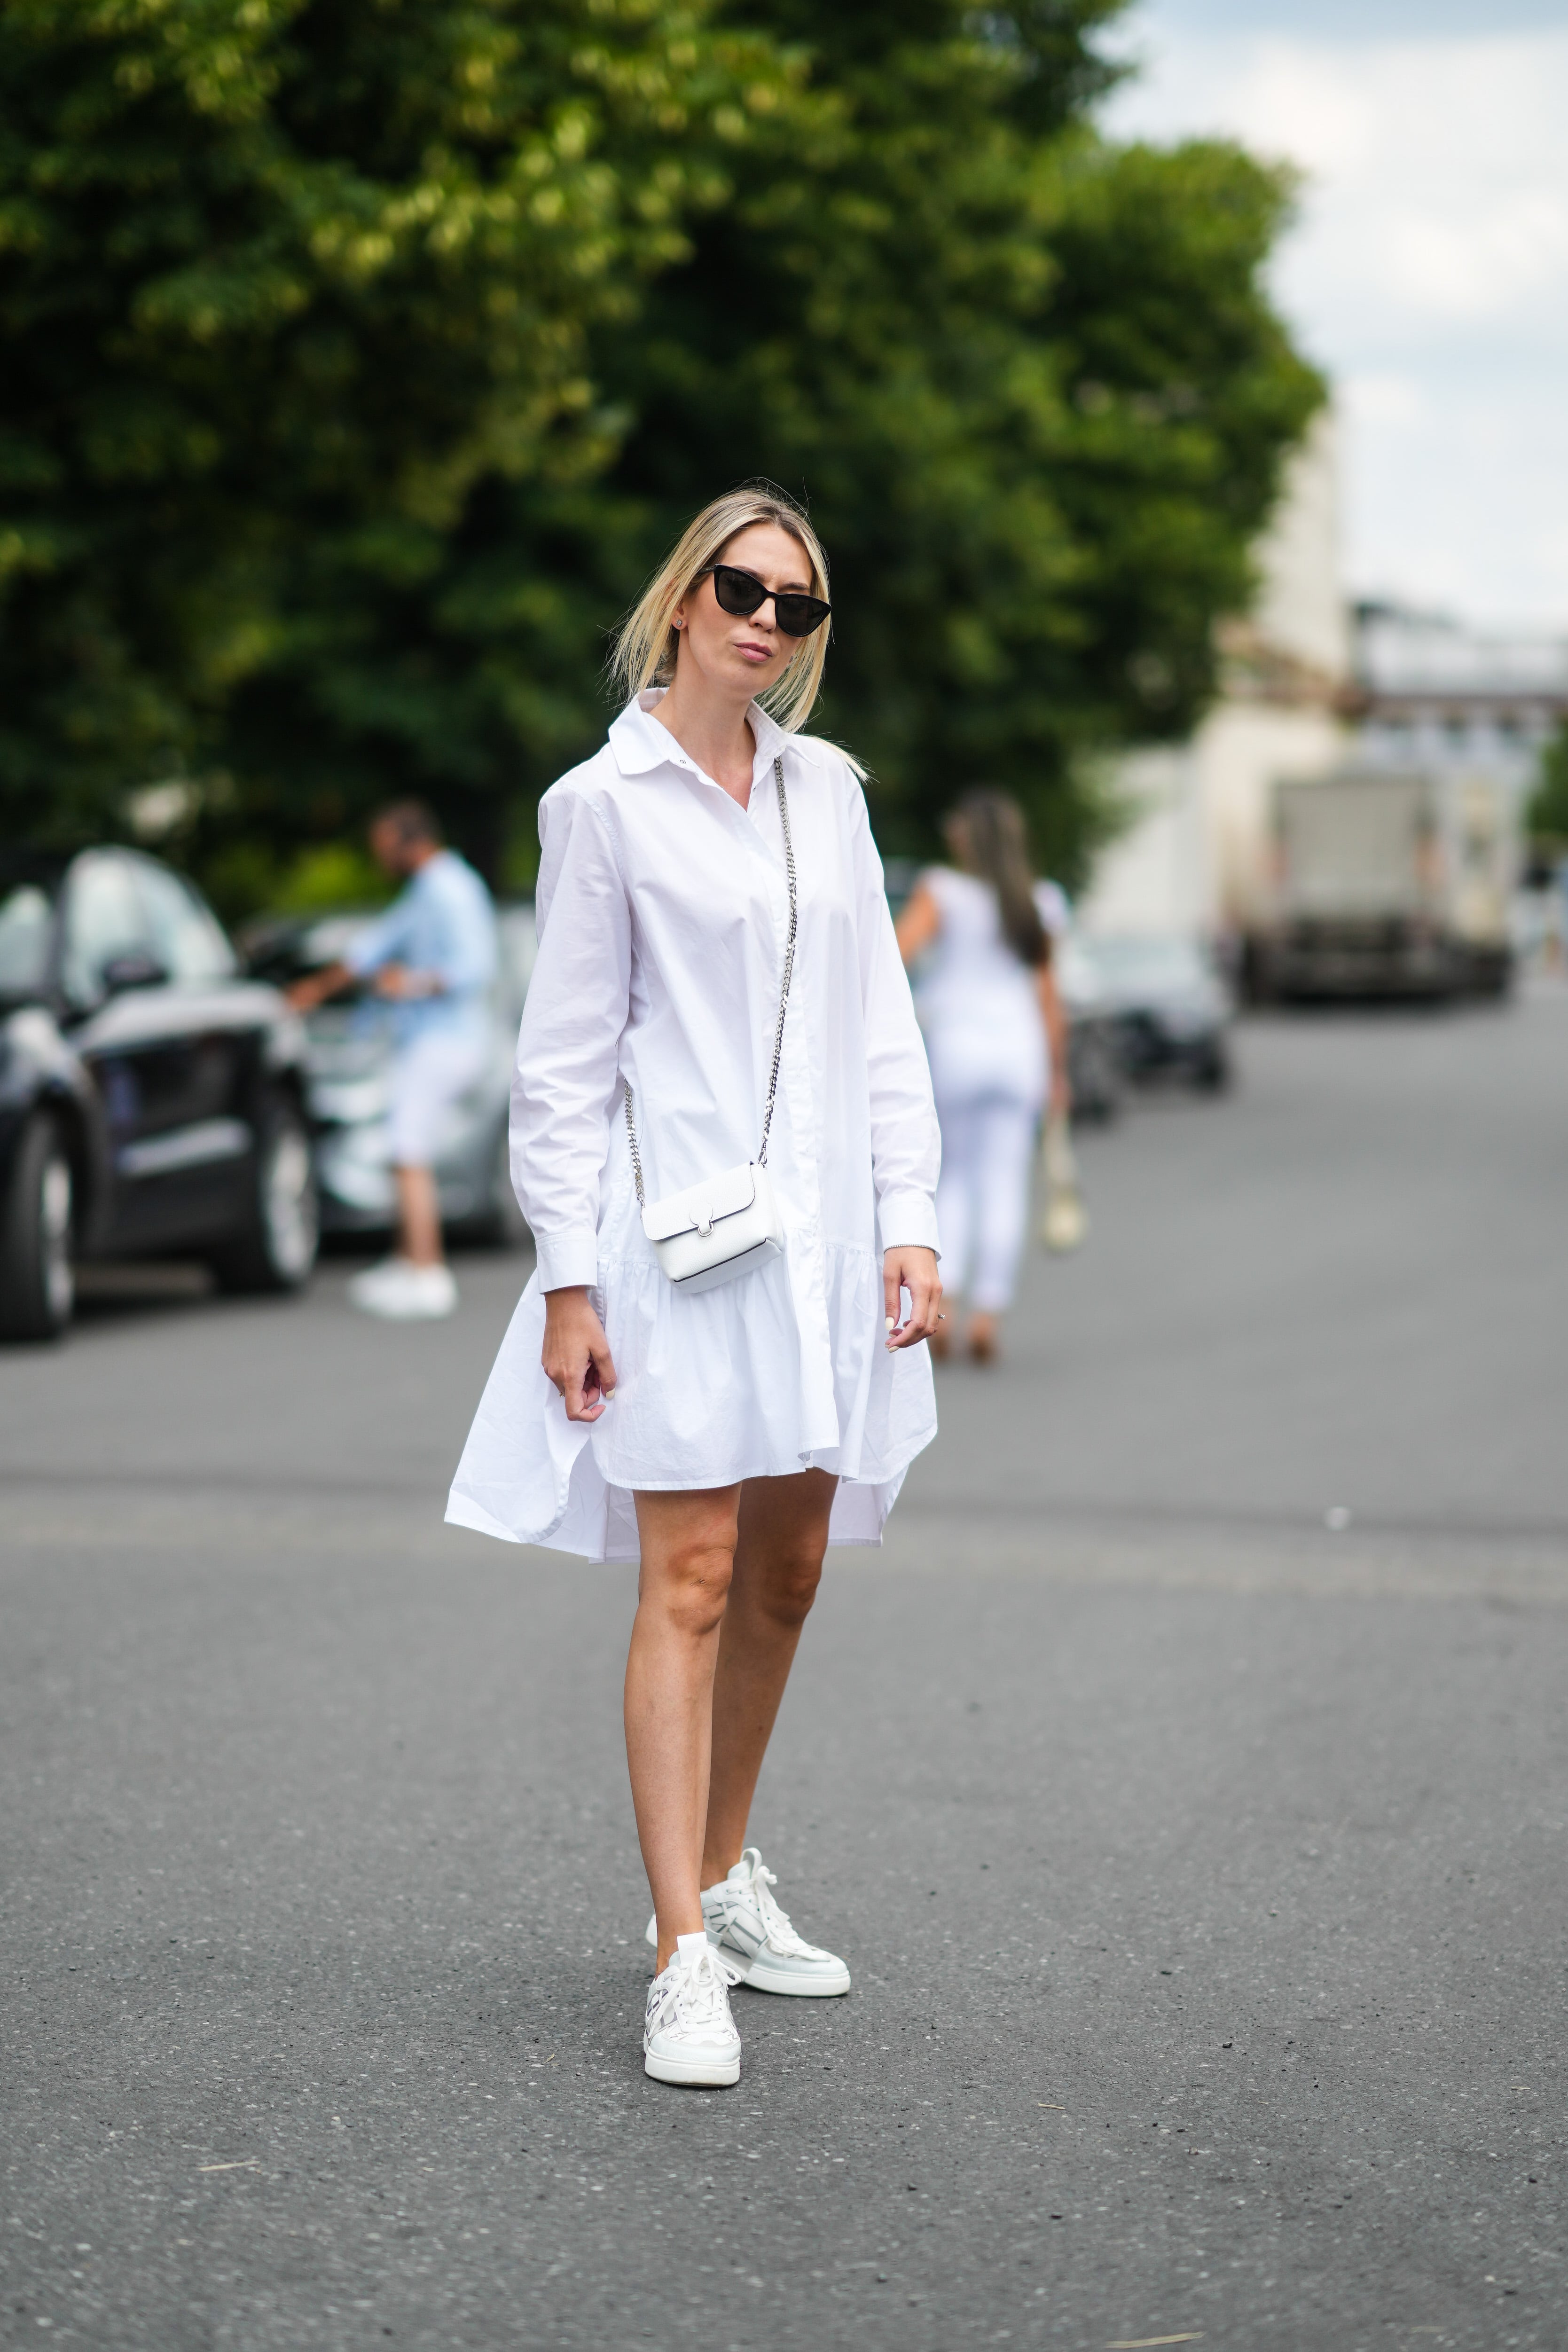 Best Outfit Ideas: Dresses With Sneakers